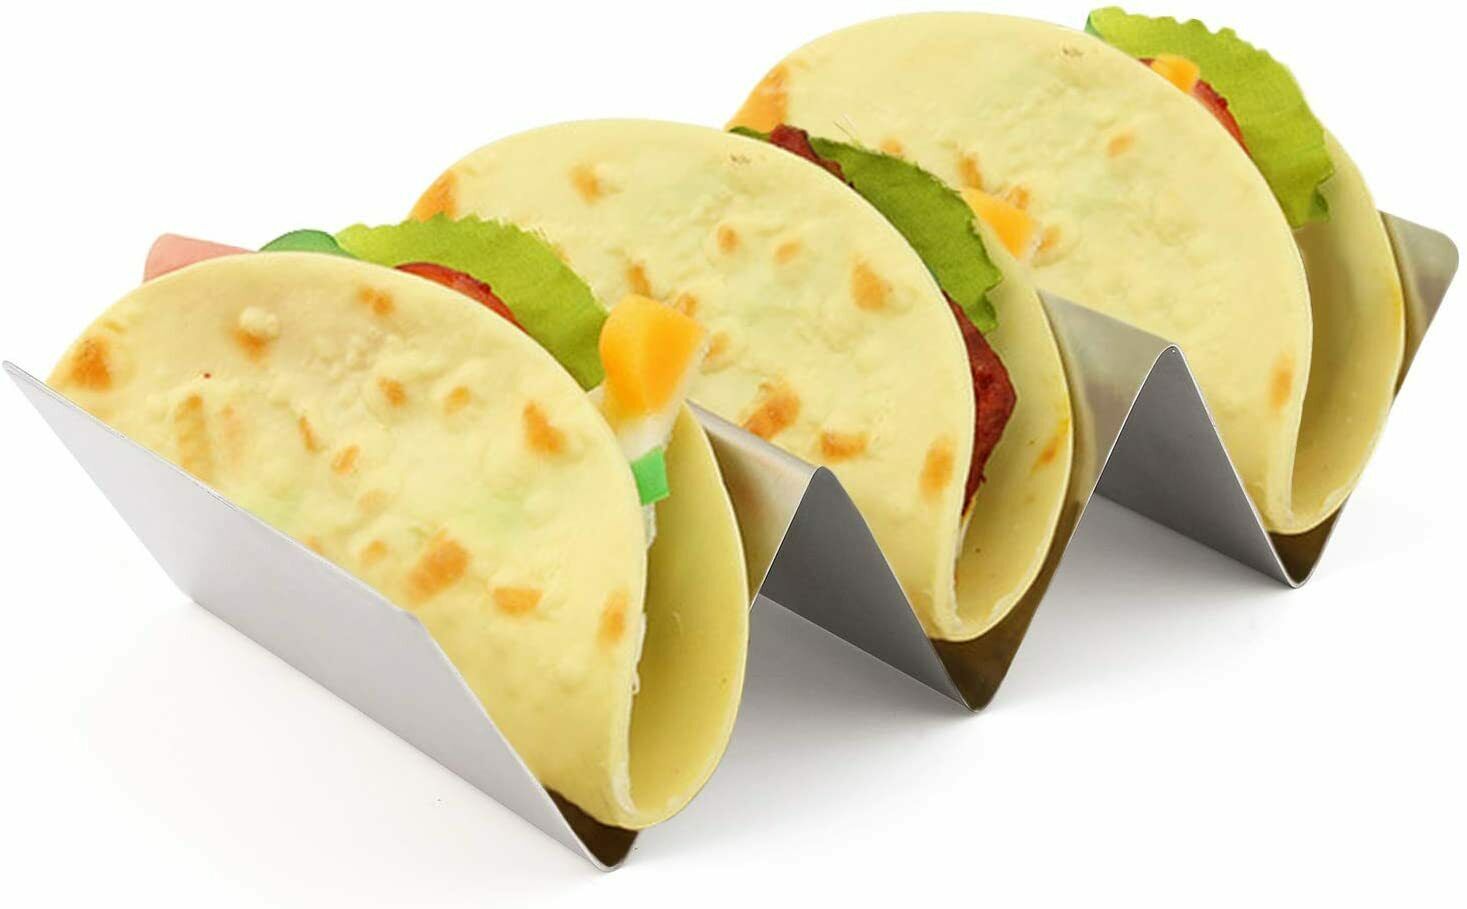 Food Grade Stainless Steel Taco Holder Stand Taco Truck Tray Style Oven Safe